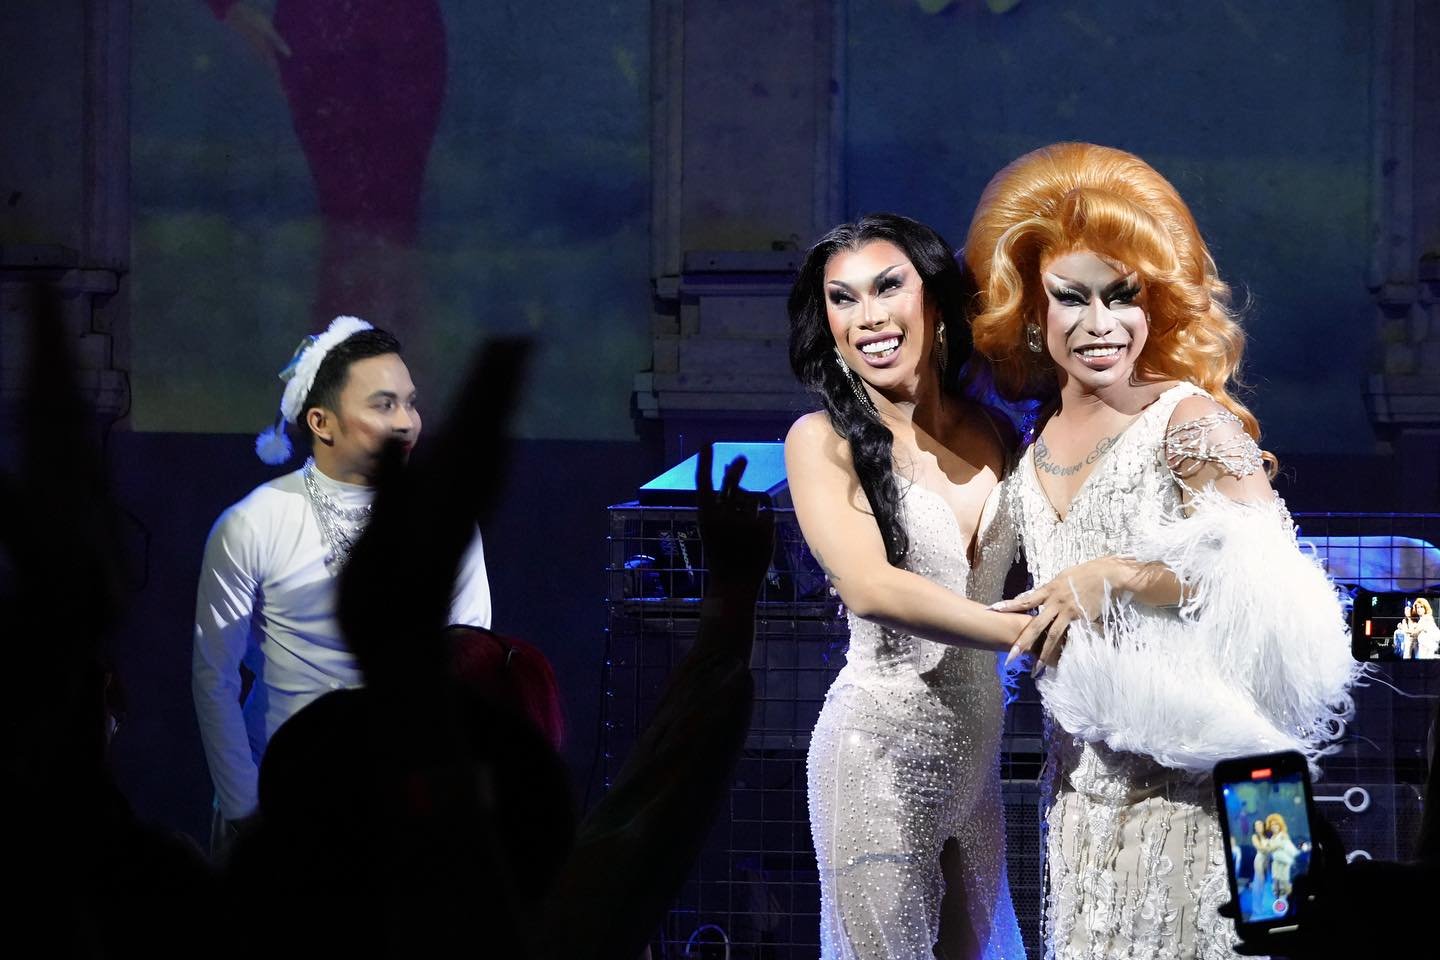 Eva Le Queen and Marina Summers’ “Joy to the World” Is Now My Standard for All Drag Shows